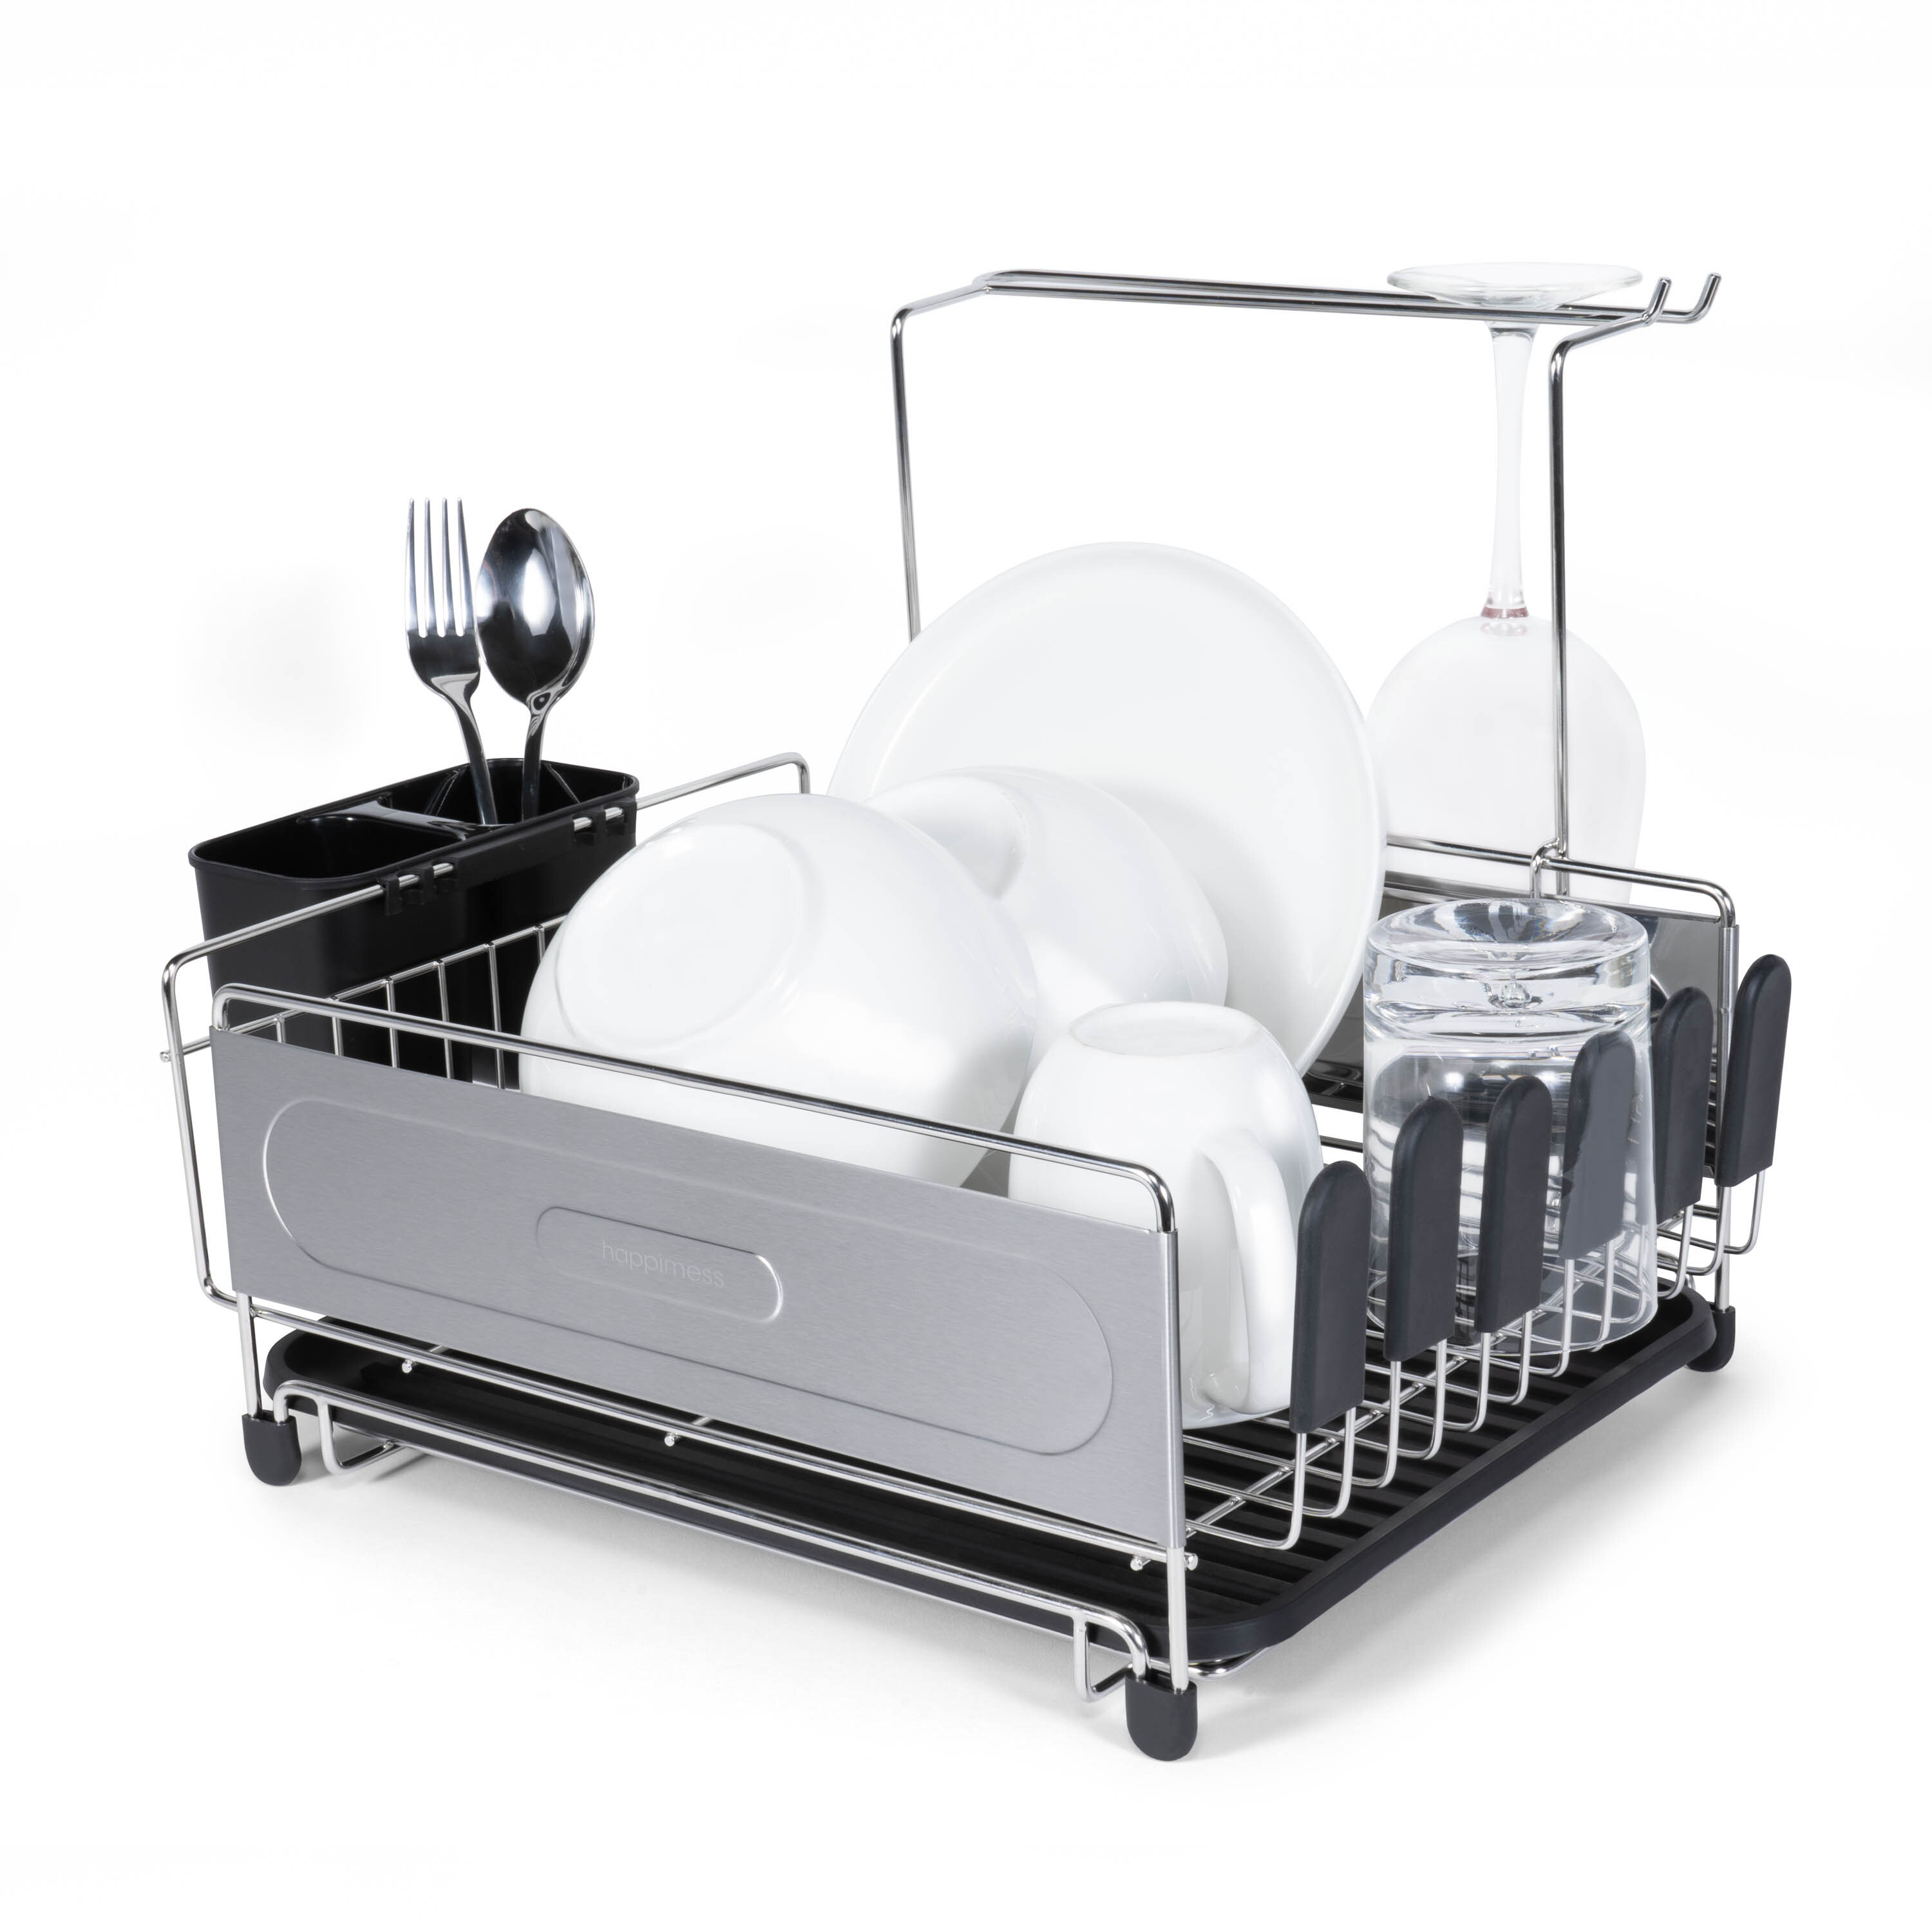 Fuleadture 2 Tier Dish Drying Rack with Drainboard, Black 